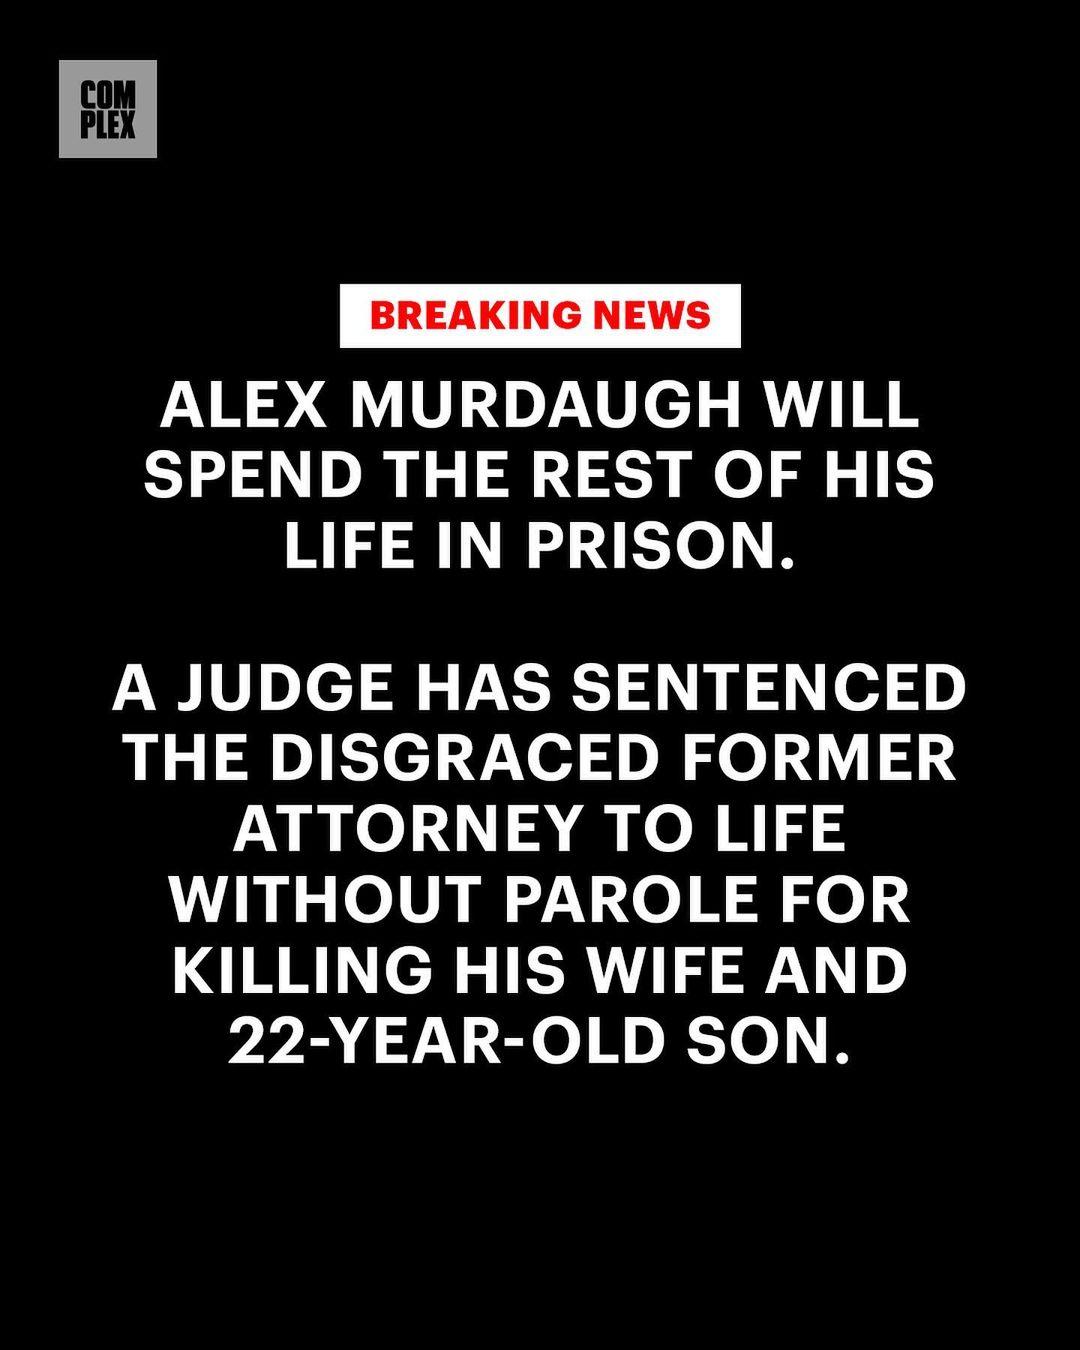 class="content__text"
 Alex Murdaugh will spend the rest of his life in prison. A judge has sentenced the disgraced former attorney to life without parole for killing his wife and 22-year-old son Link in bio 🔗 for more. 
 